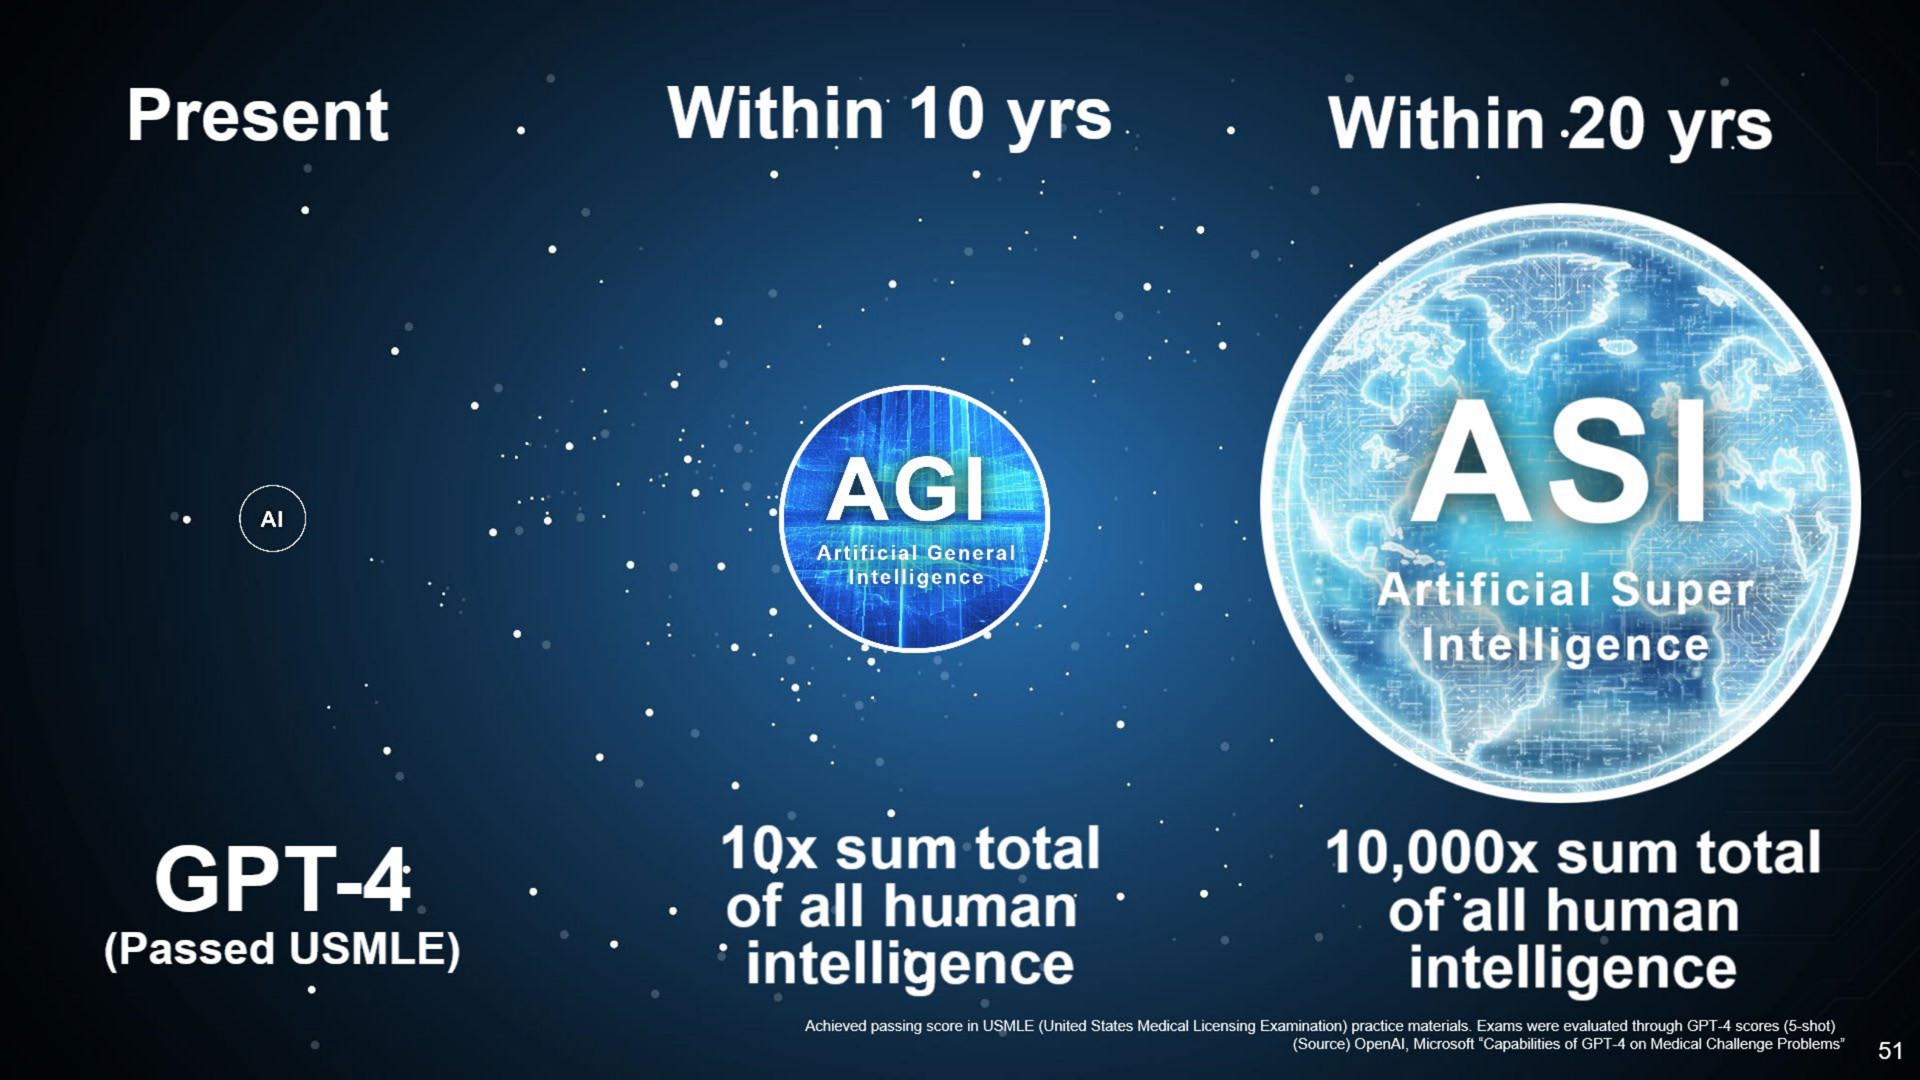 present passed within yrs within yrs intelligence sum total intelligence | SoftBank